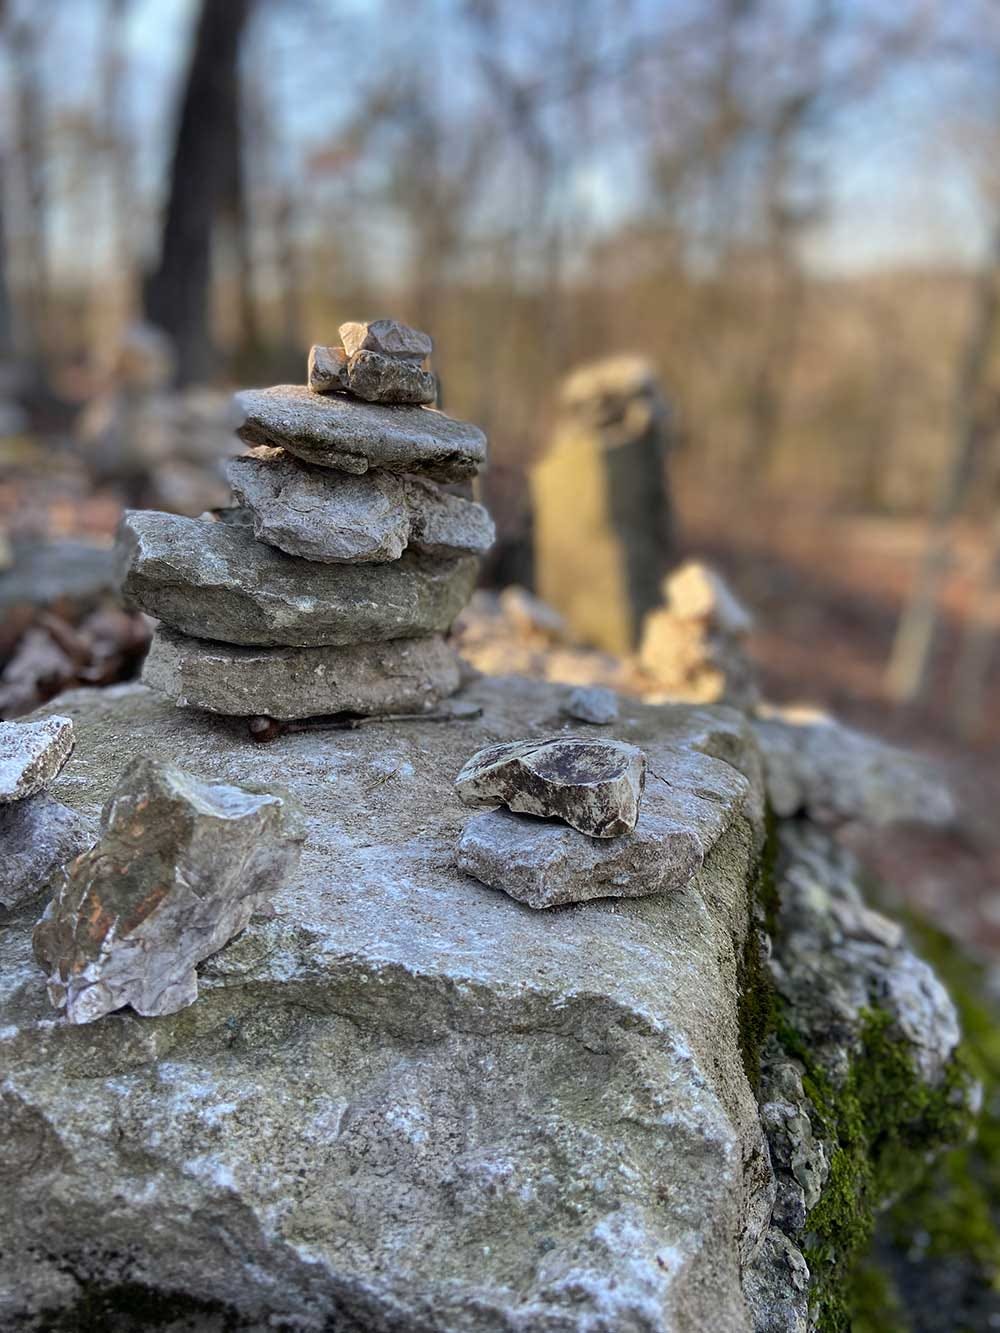 The stacked rocks are neat.